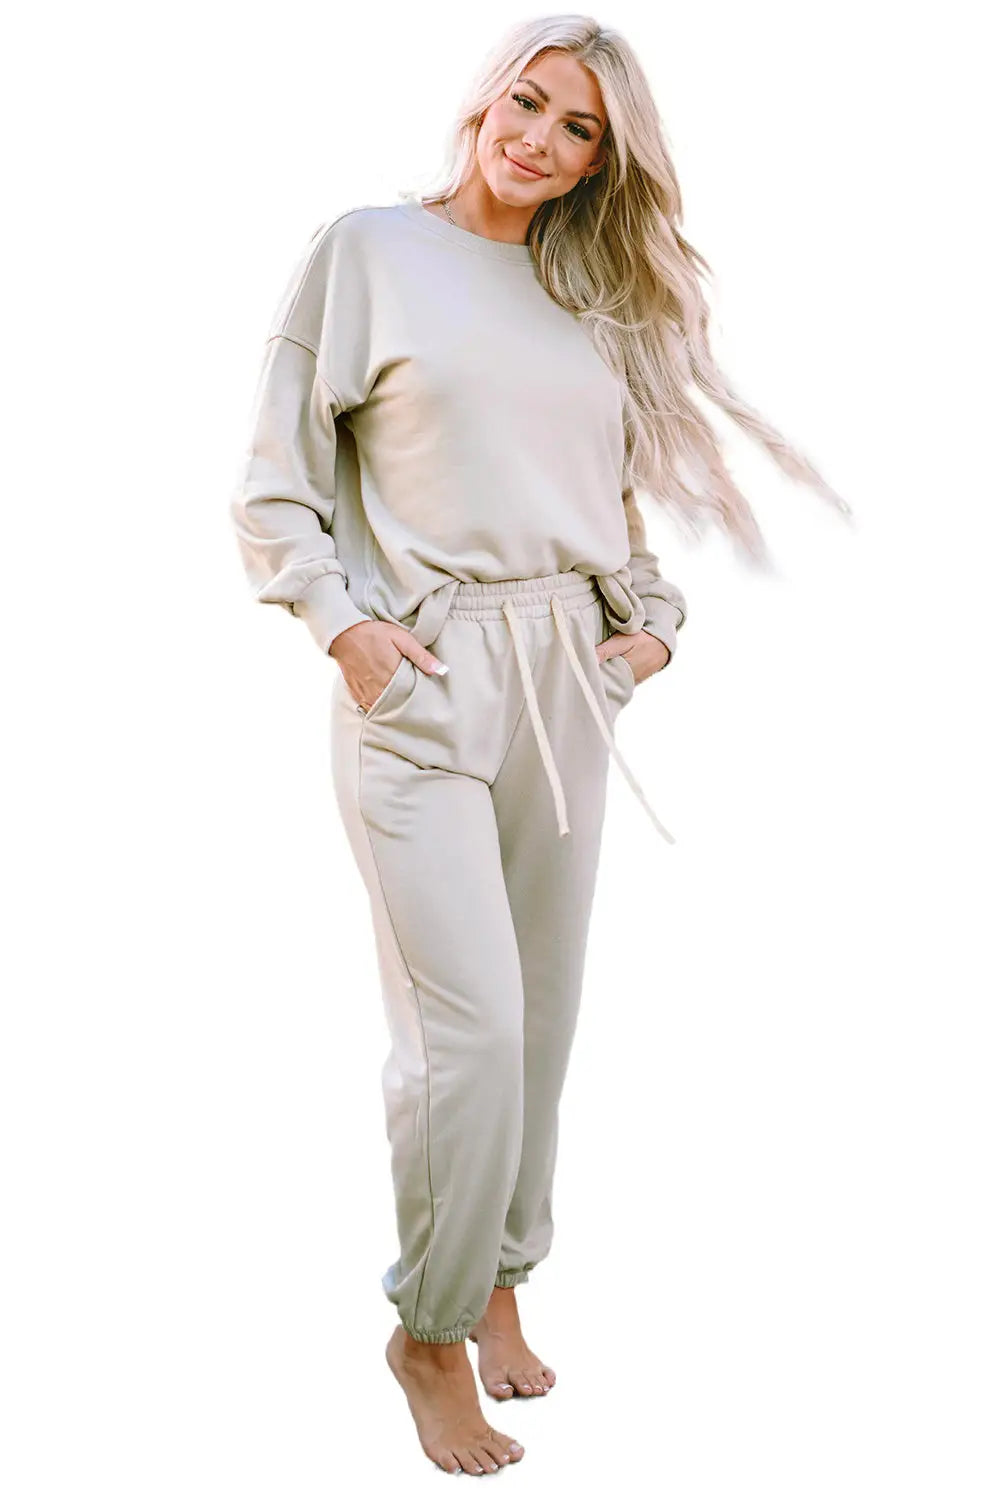 Beige long sleeve top and drawstring pants lounge outfit - loungewear